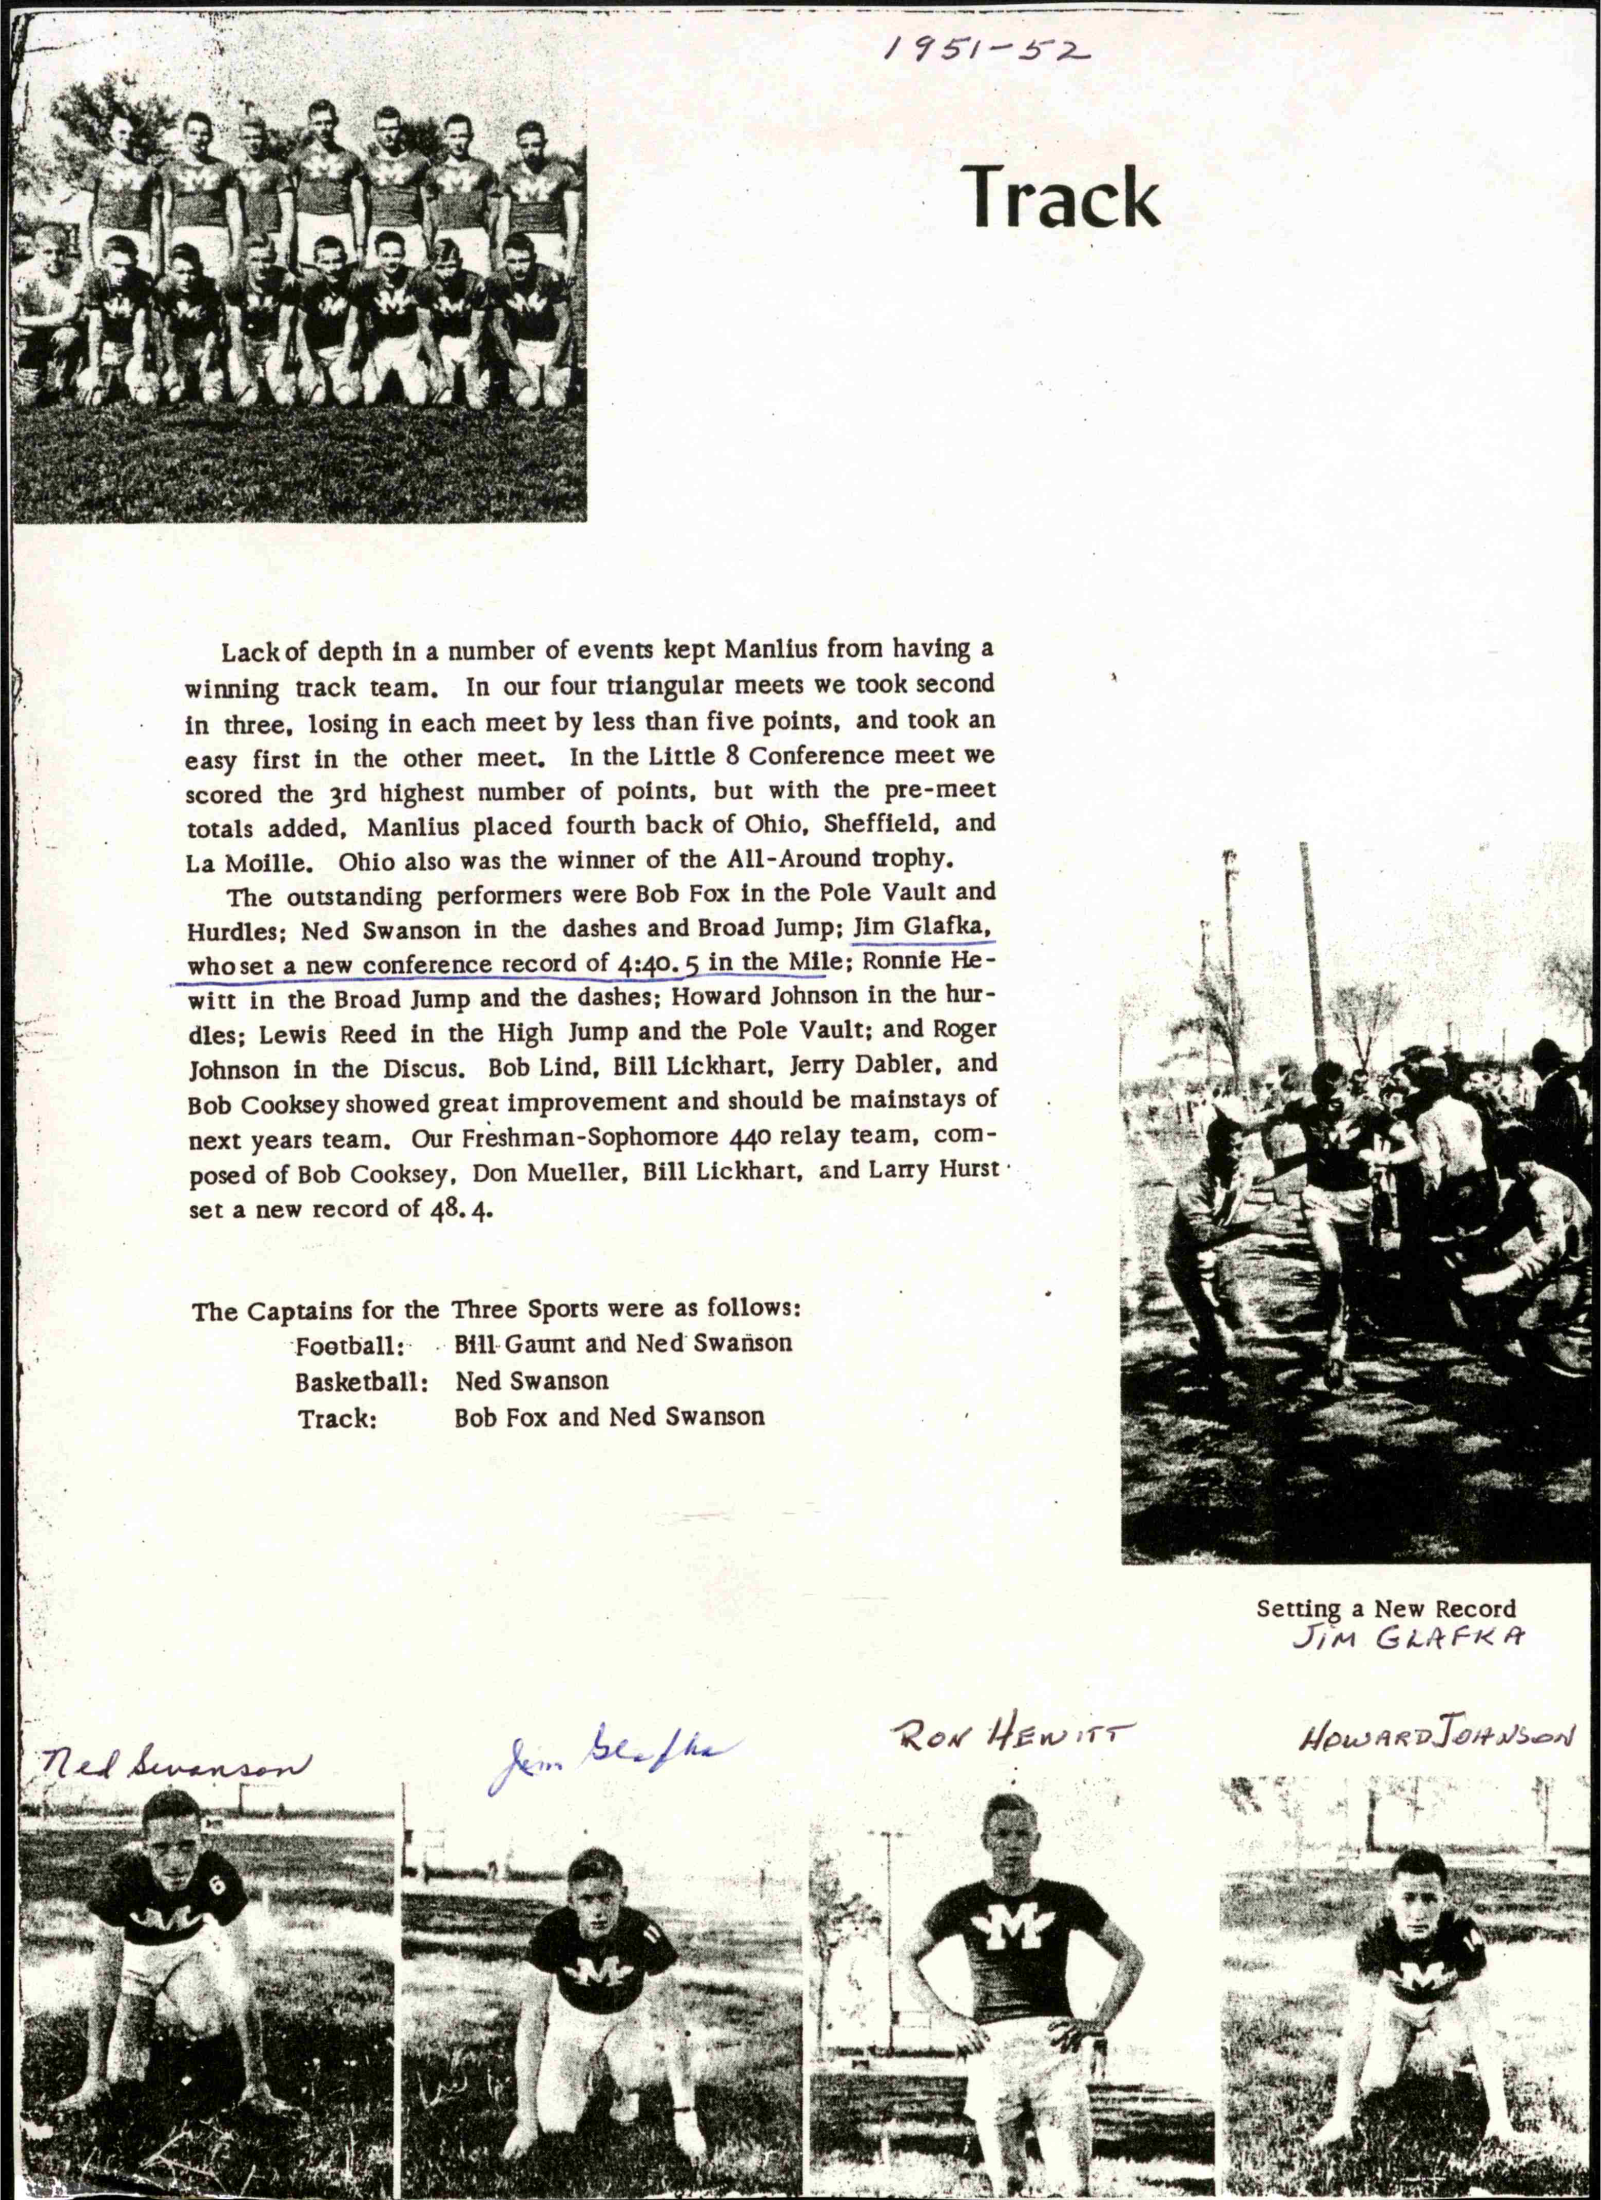 Album 16 MANLIUS HIGH SCHOOL FROM 1950-1995 Page 037